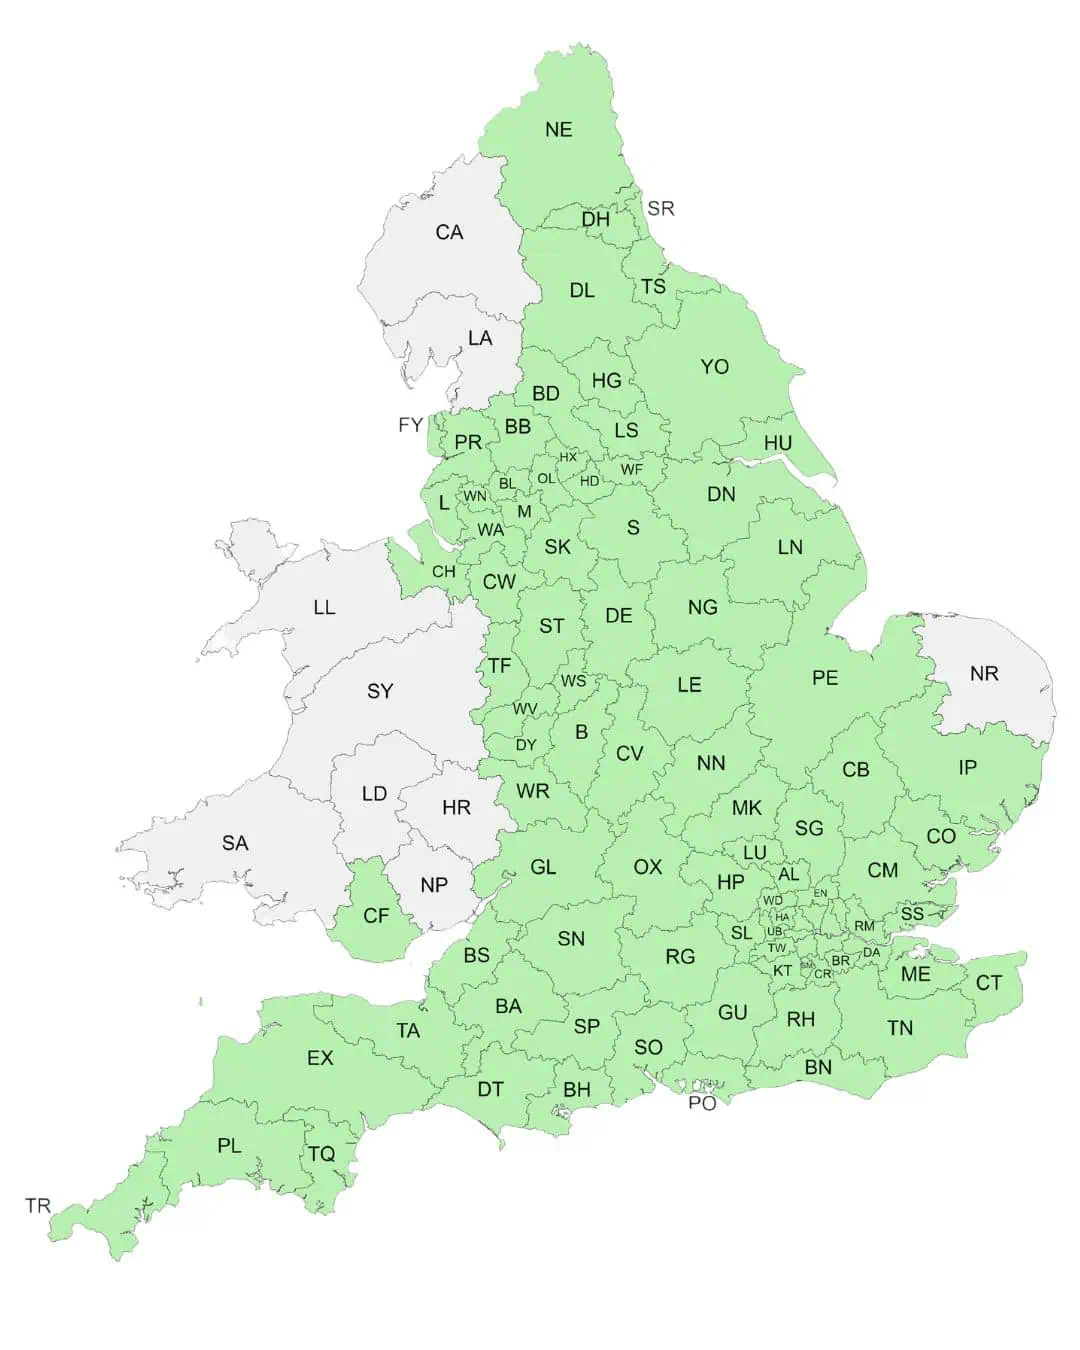 Map of England and Wales. Highlighted postcodes where Anglo operates.